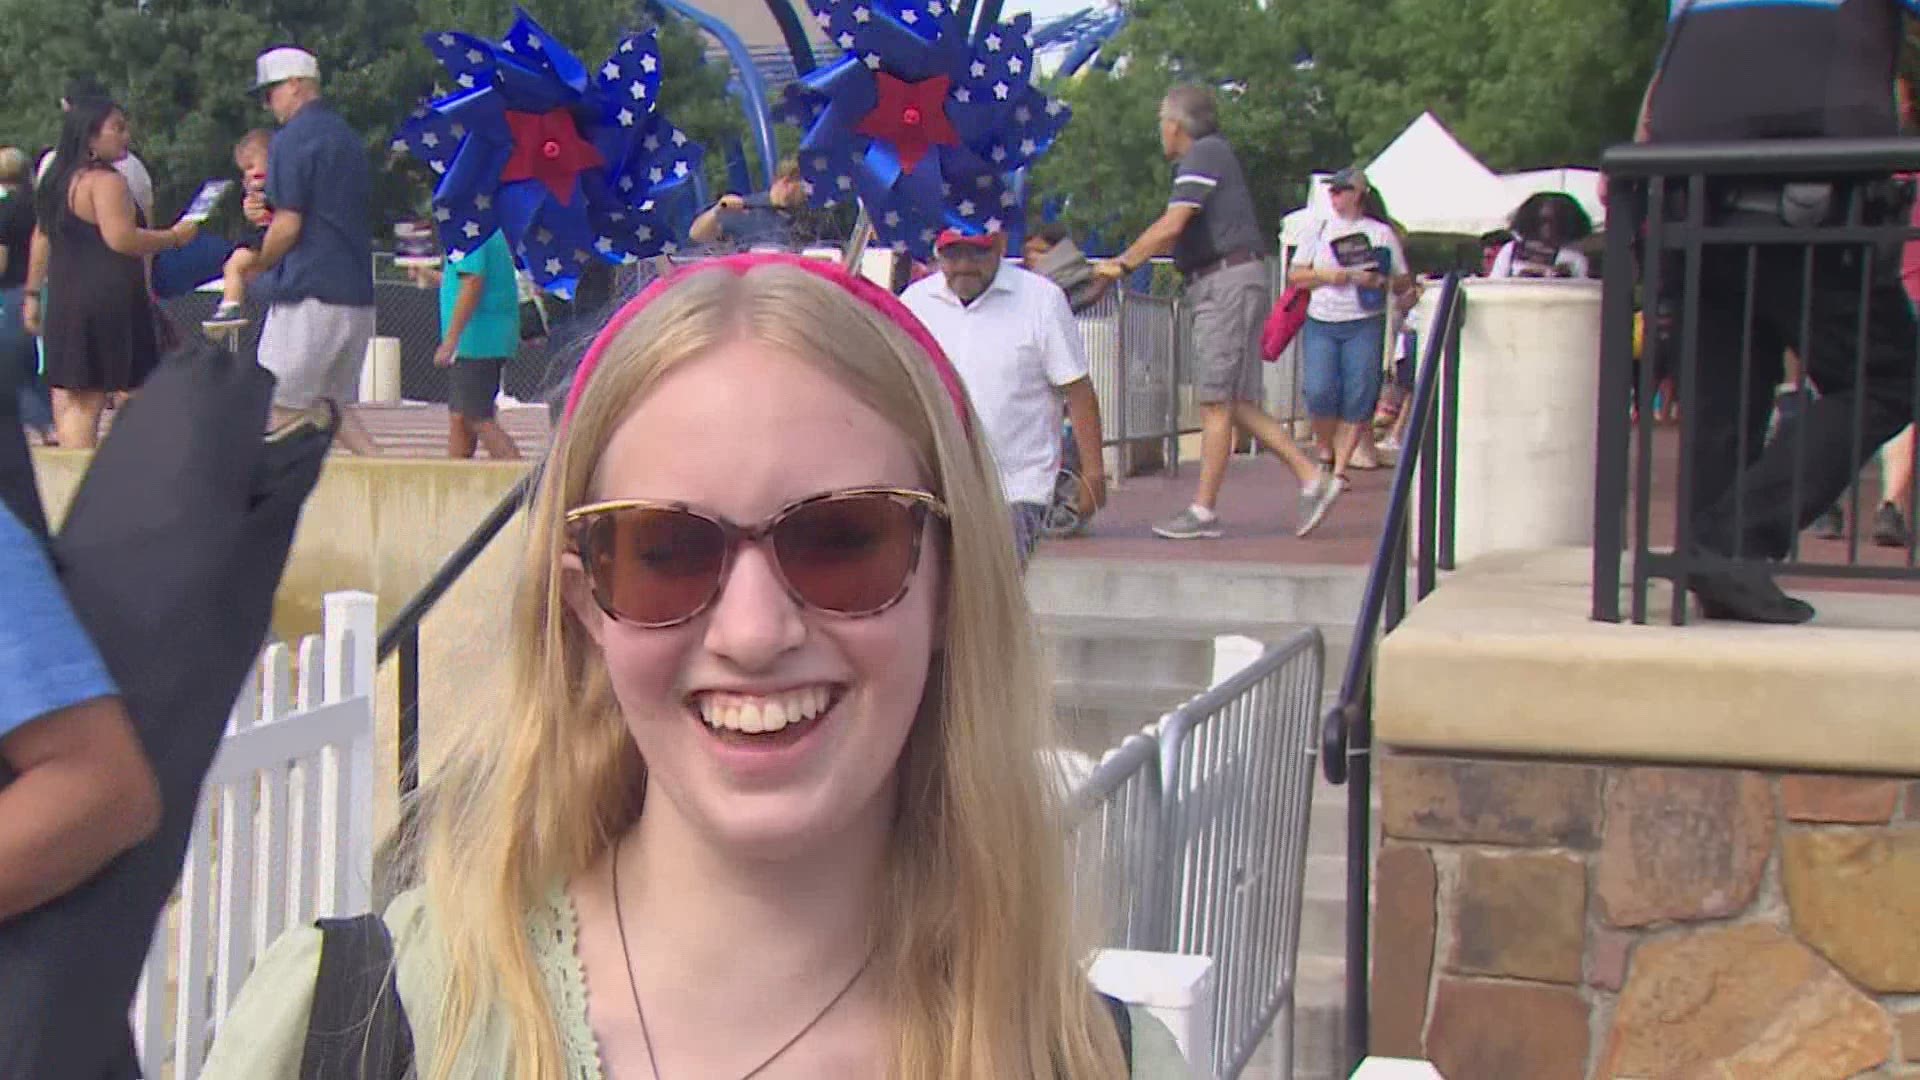 As people across North Texas celebrated in different ways, WFAA asked them one question: what does July 4th mean to you?